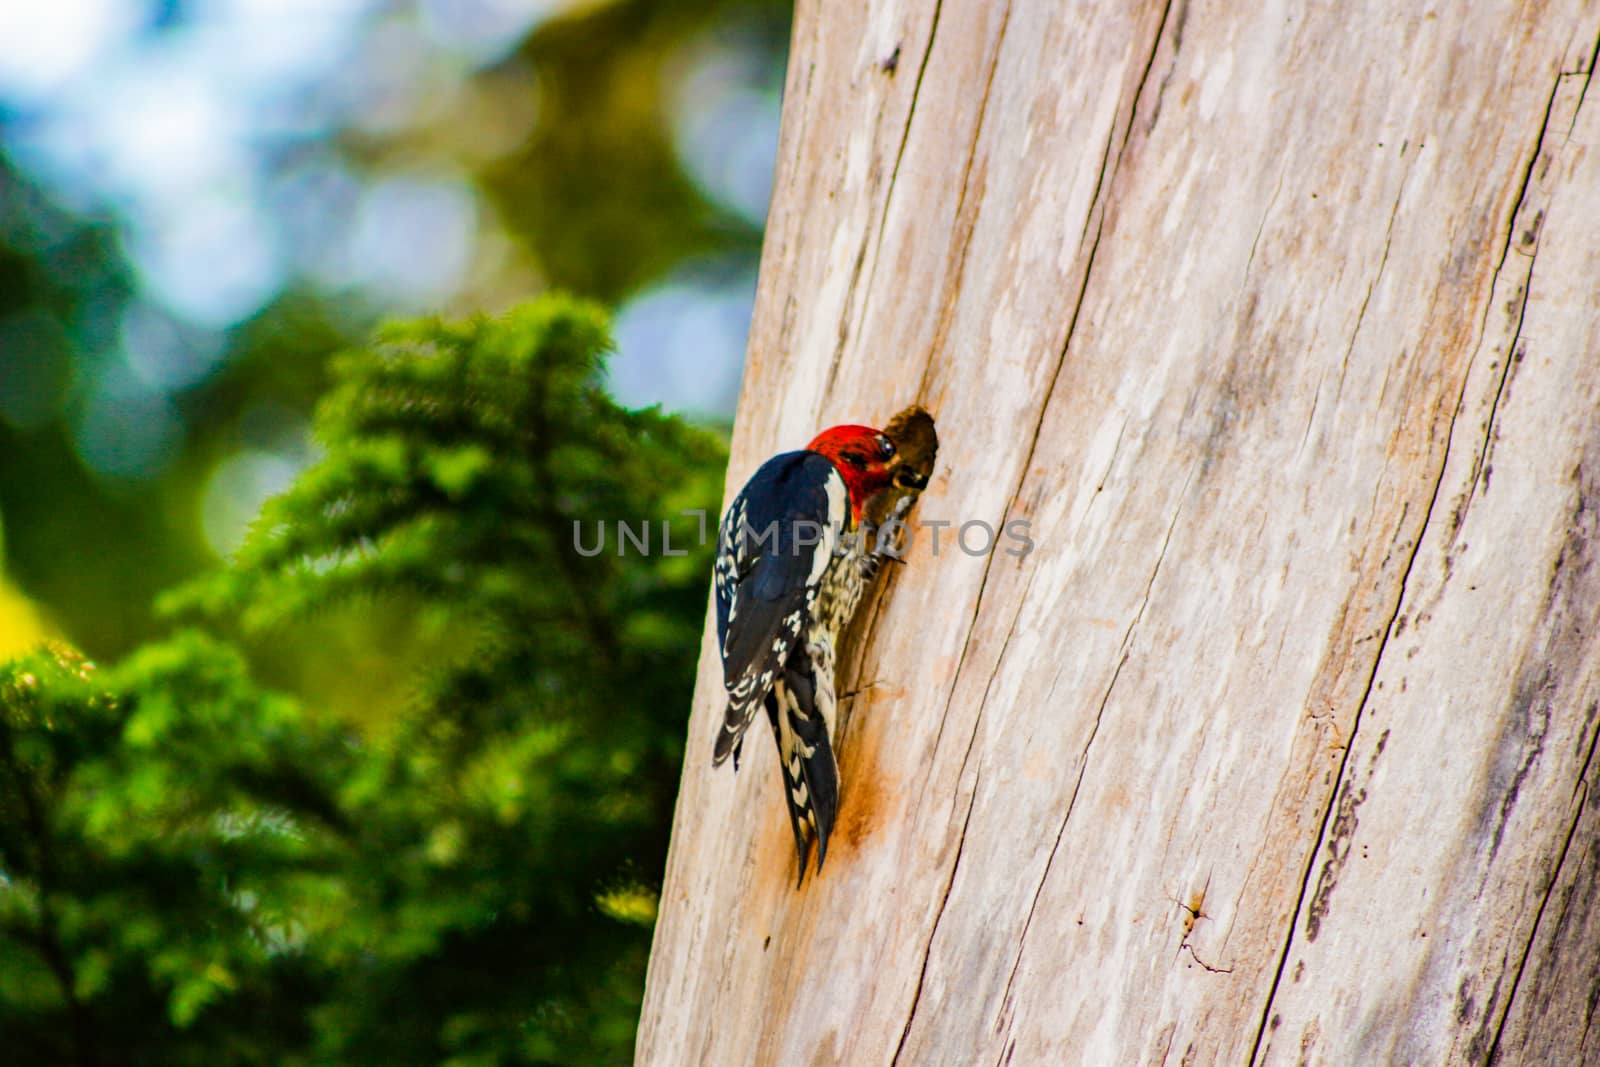 Yellow-Bellied Sapsucker (Sphyrapicus varius). A female Yellow-bellied Sapsucker scours the trunk of a birch tree in search of insects trapped in pools of sap. by mynewturtle1